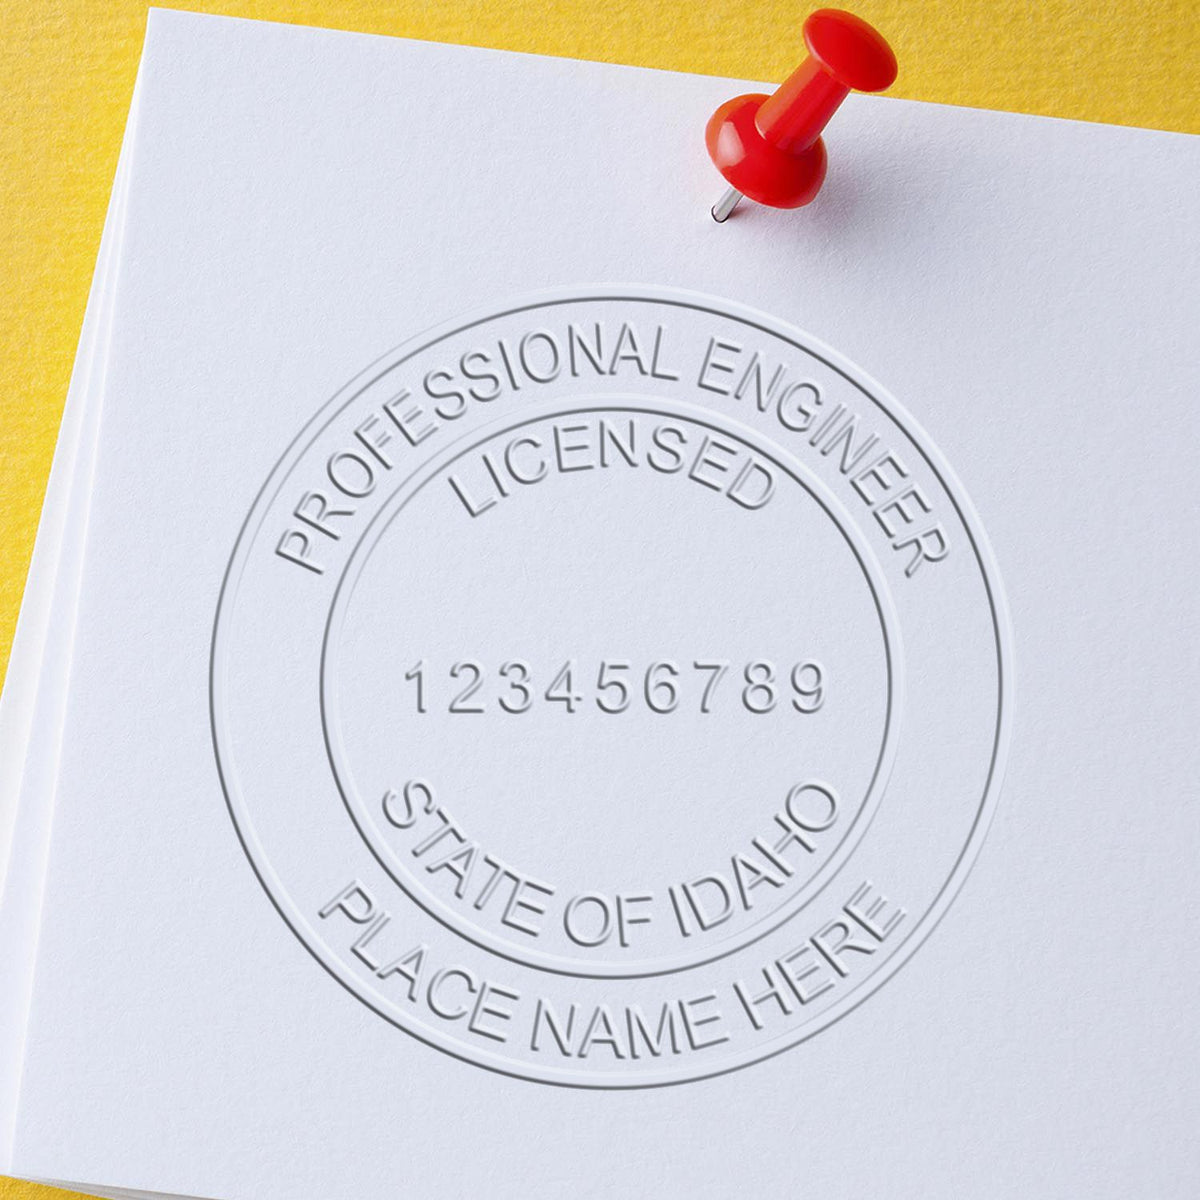 The Gift Idaho Engineer Seal stamp impression comes to life with a crisp, detailed image stamped on paper - showcasing true professional quality.